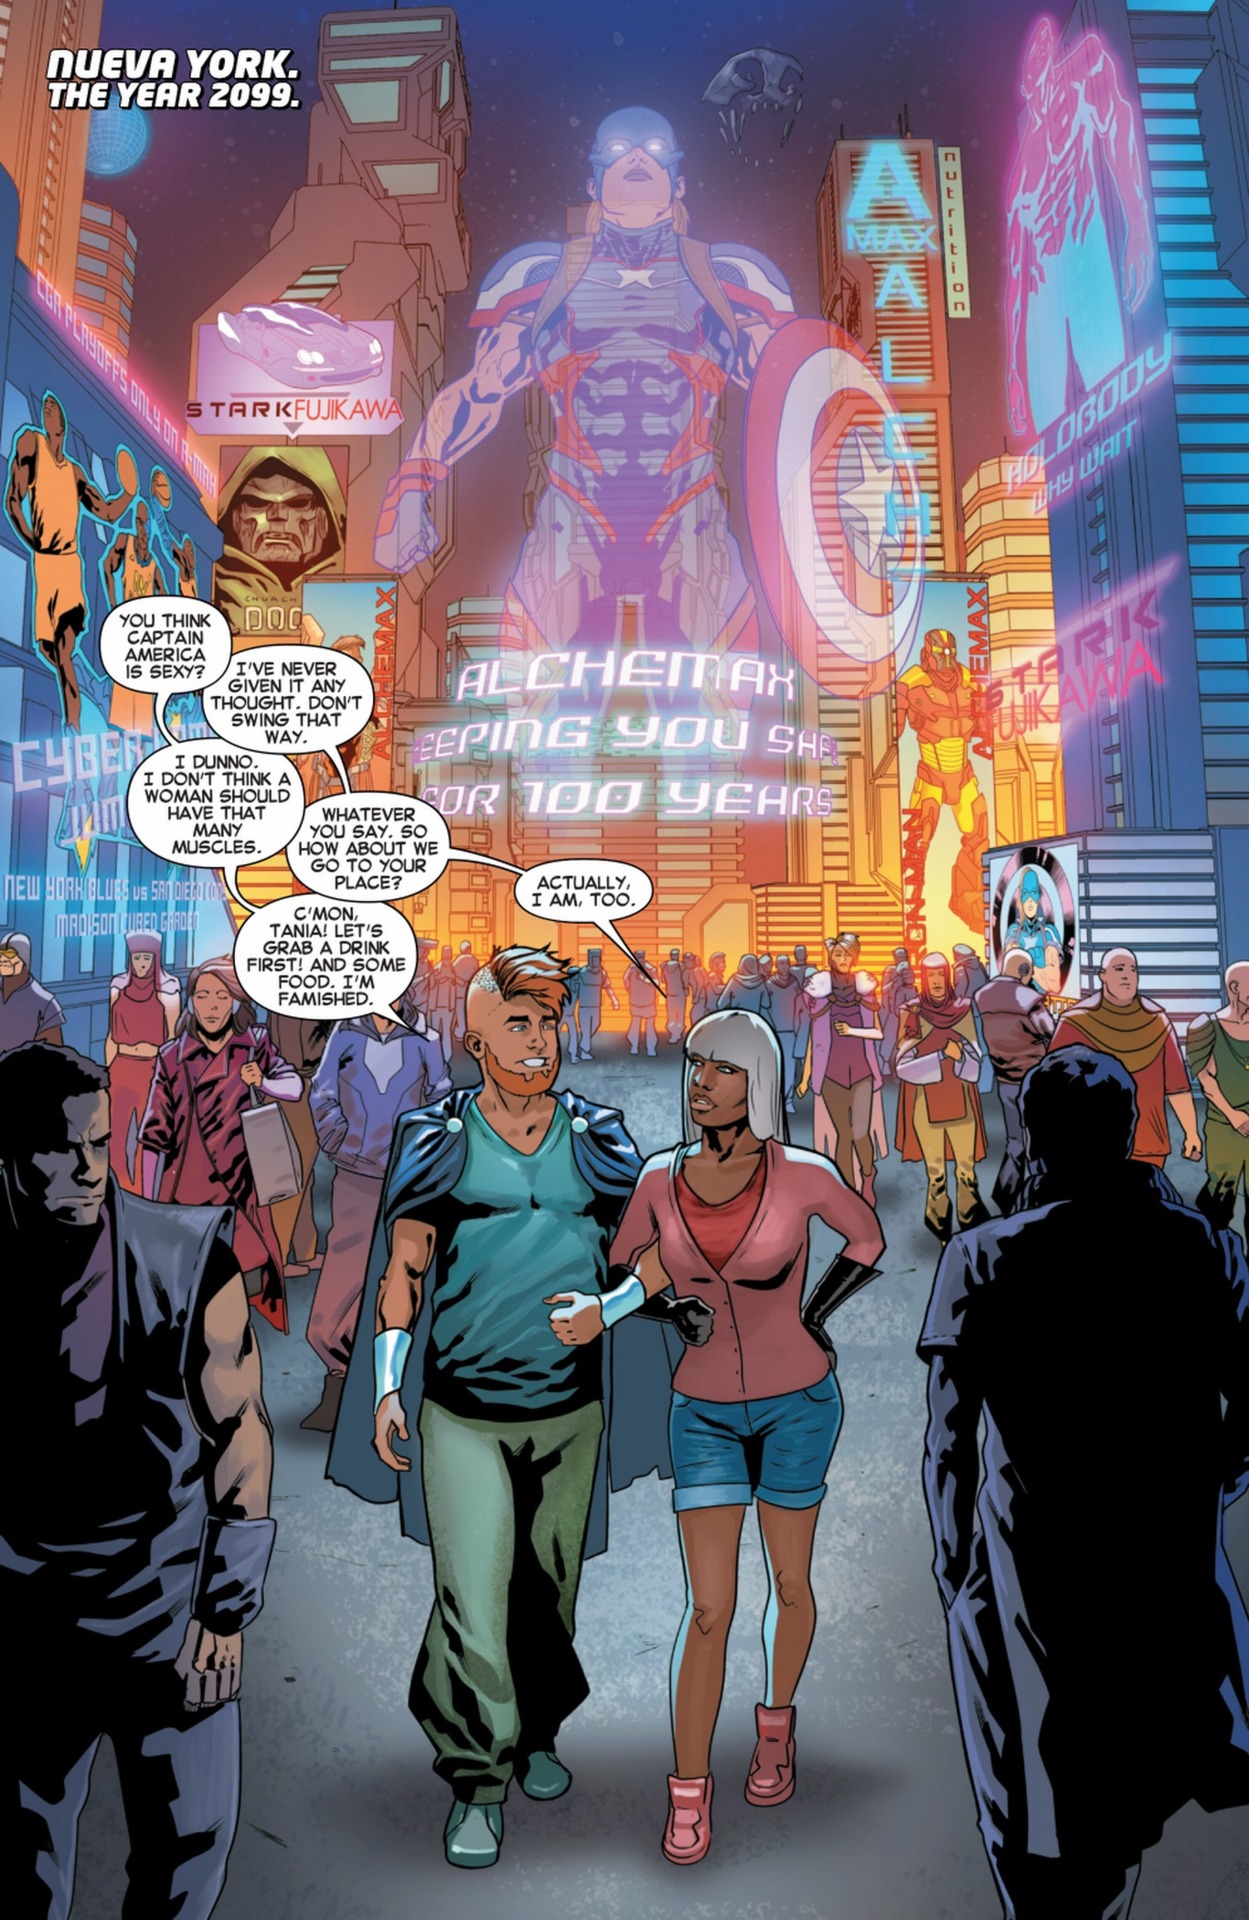 An example of Downtown New York's Time Square in 2099 and what people look like.